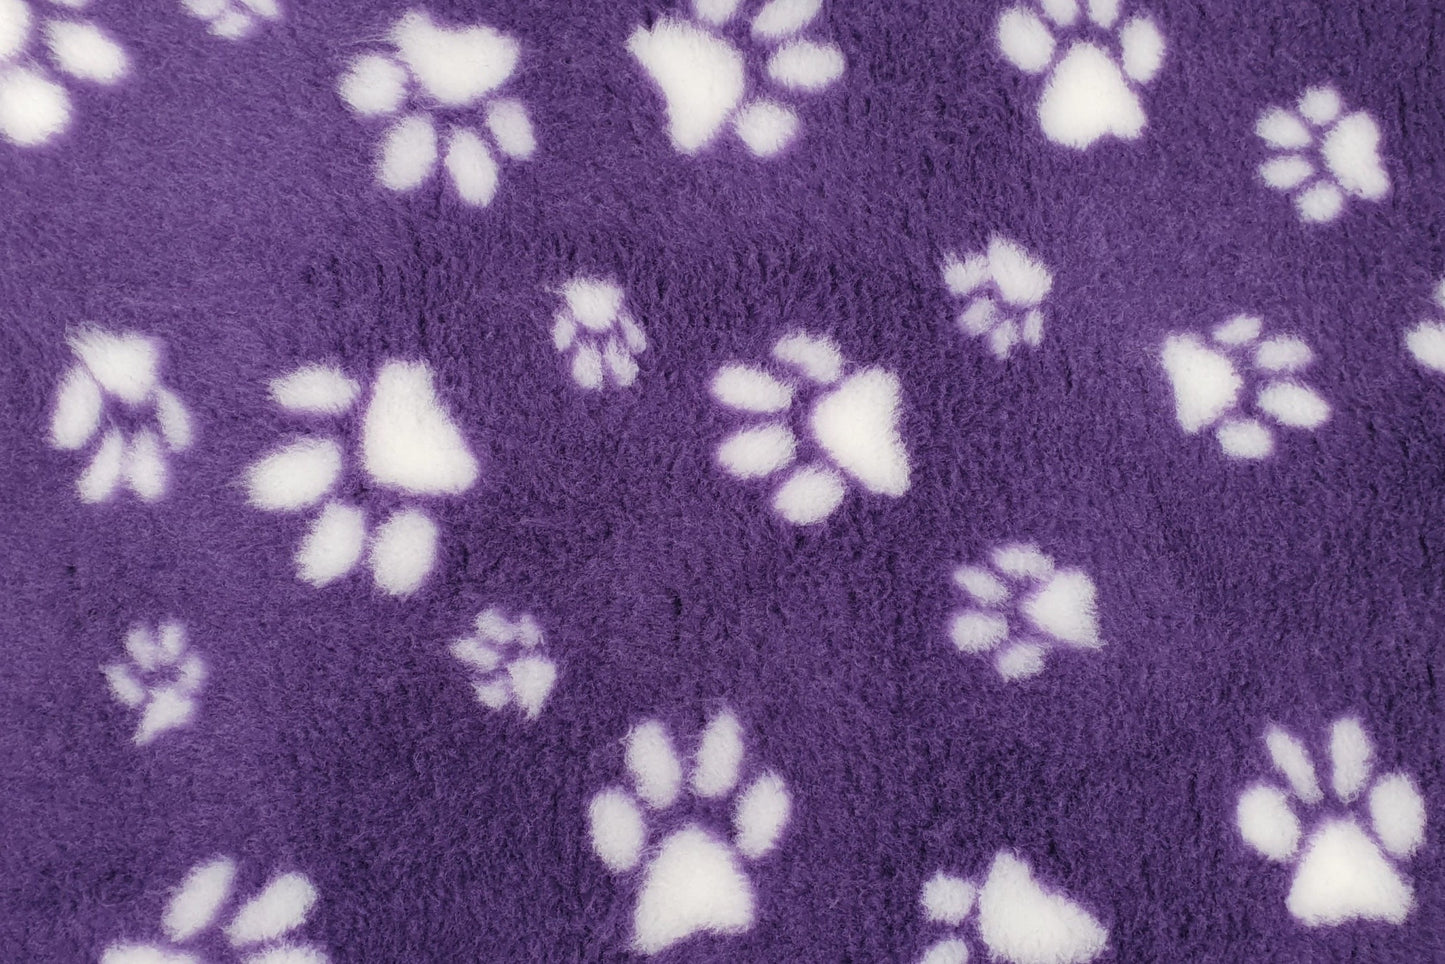 Vet Bed - Rubber Backed - Purple with White Designer Paws